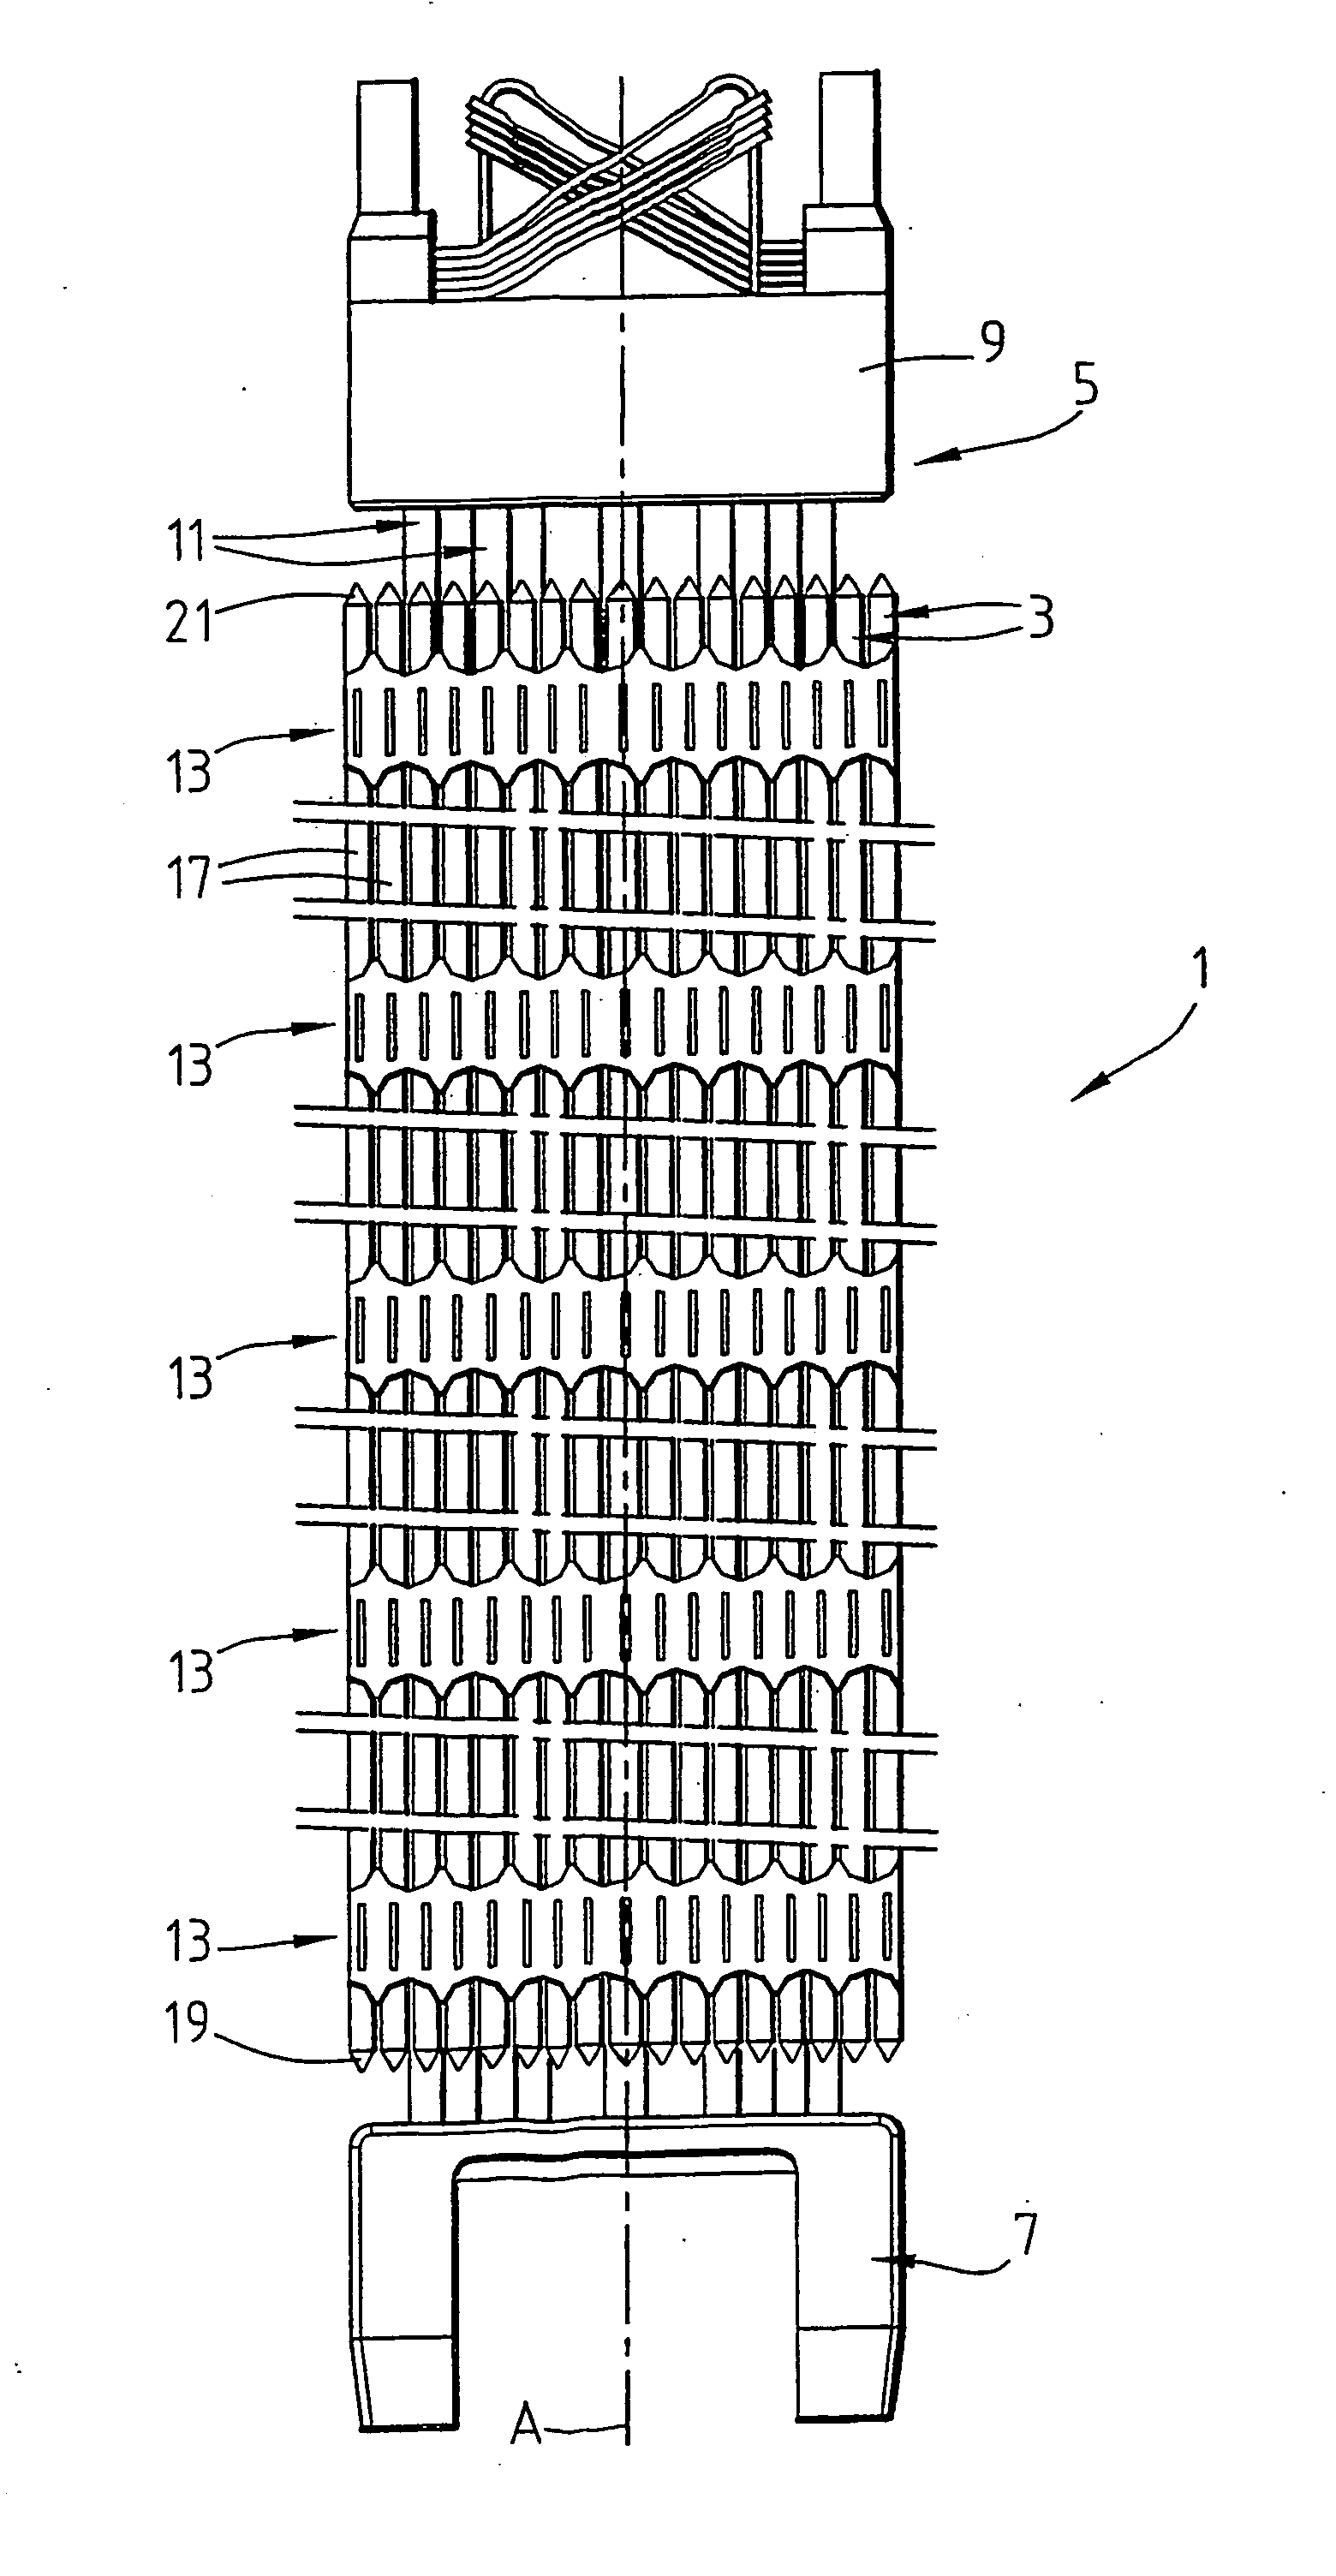 Terminal end-piece for a fuel assembly having an arrangement for maintaining the ends of the rods and corresponding assembly